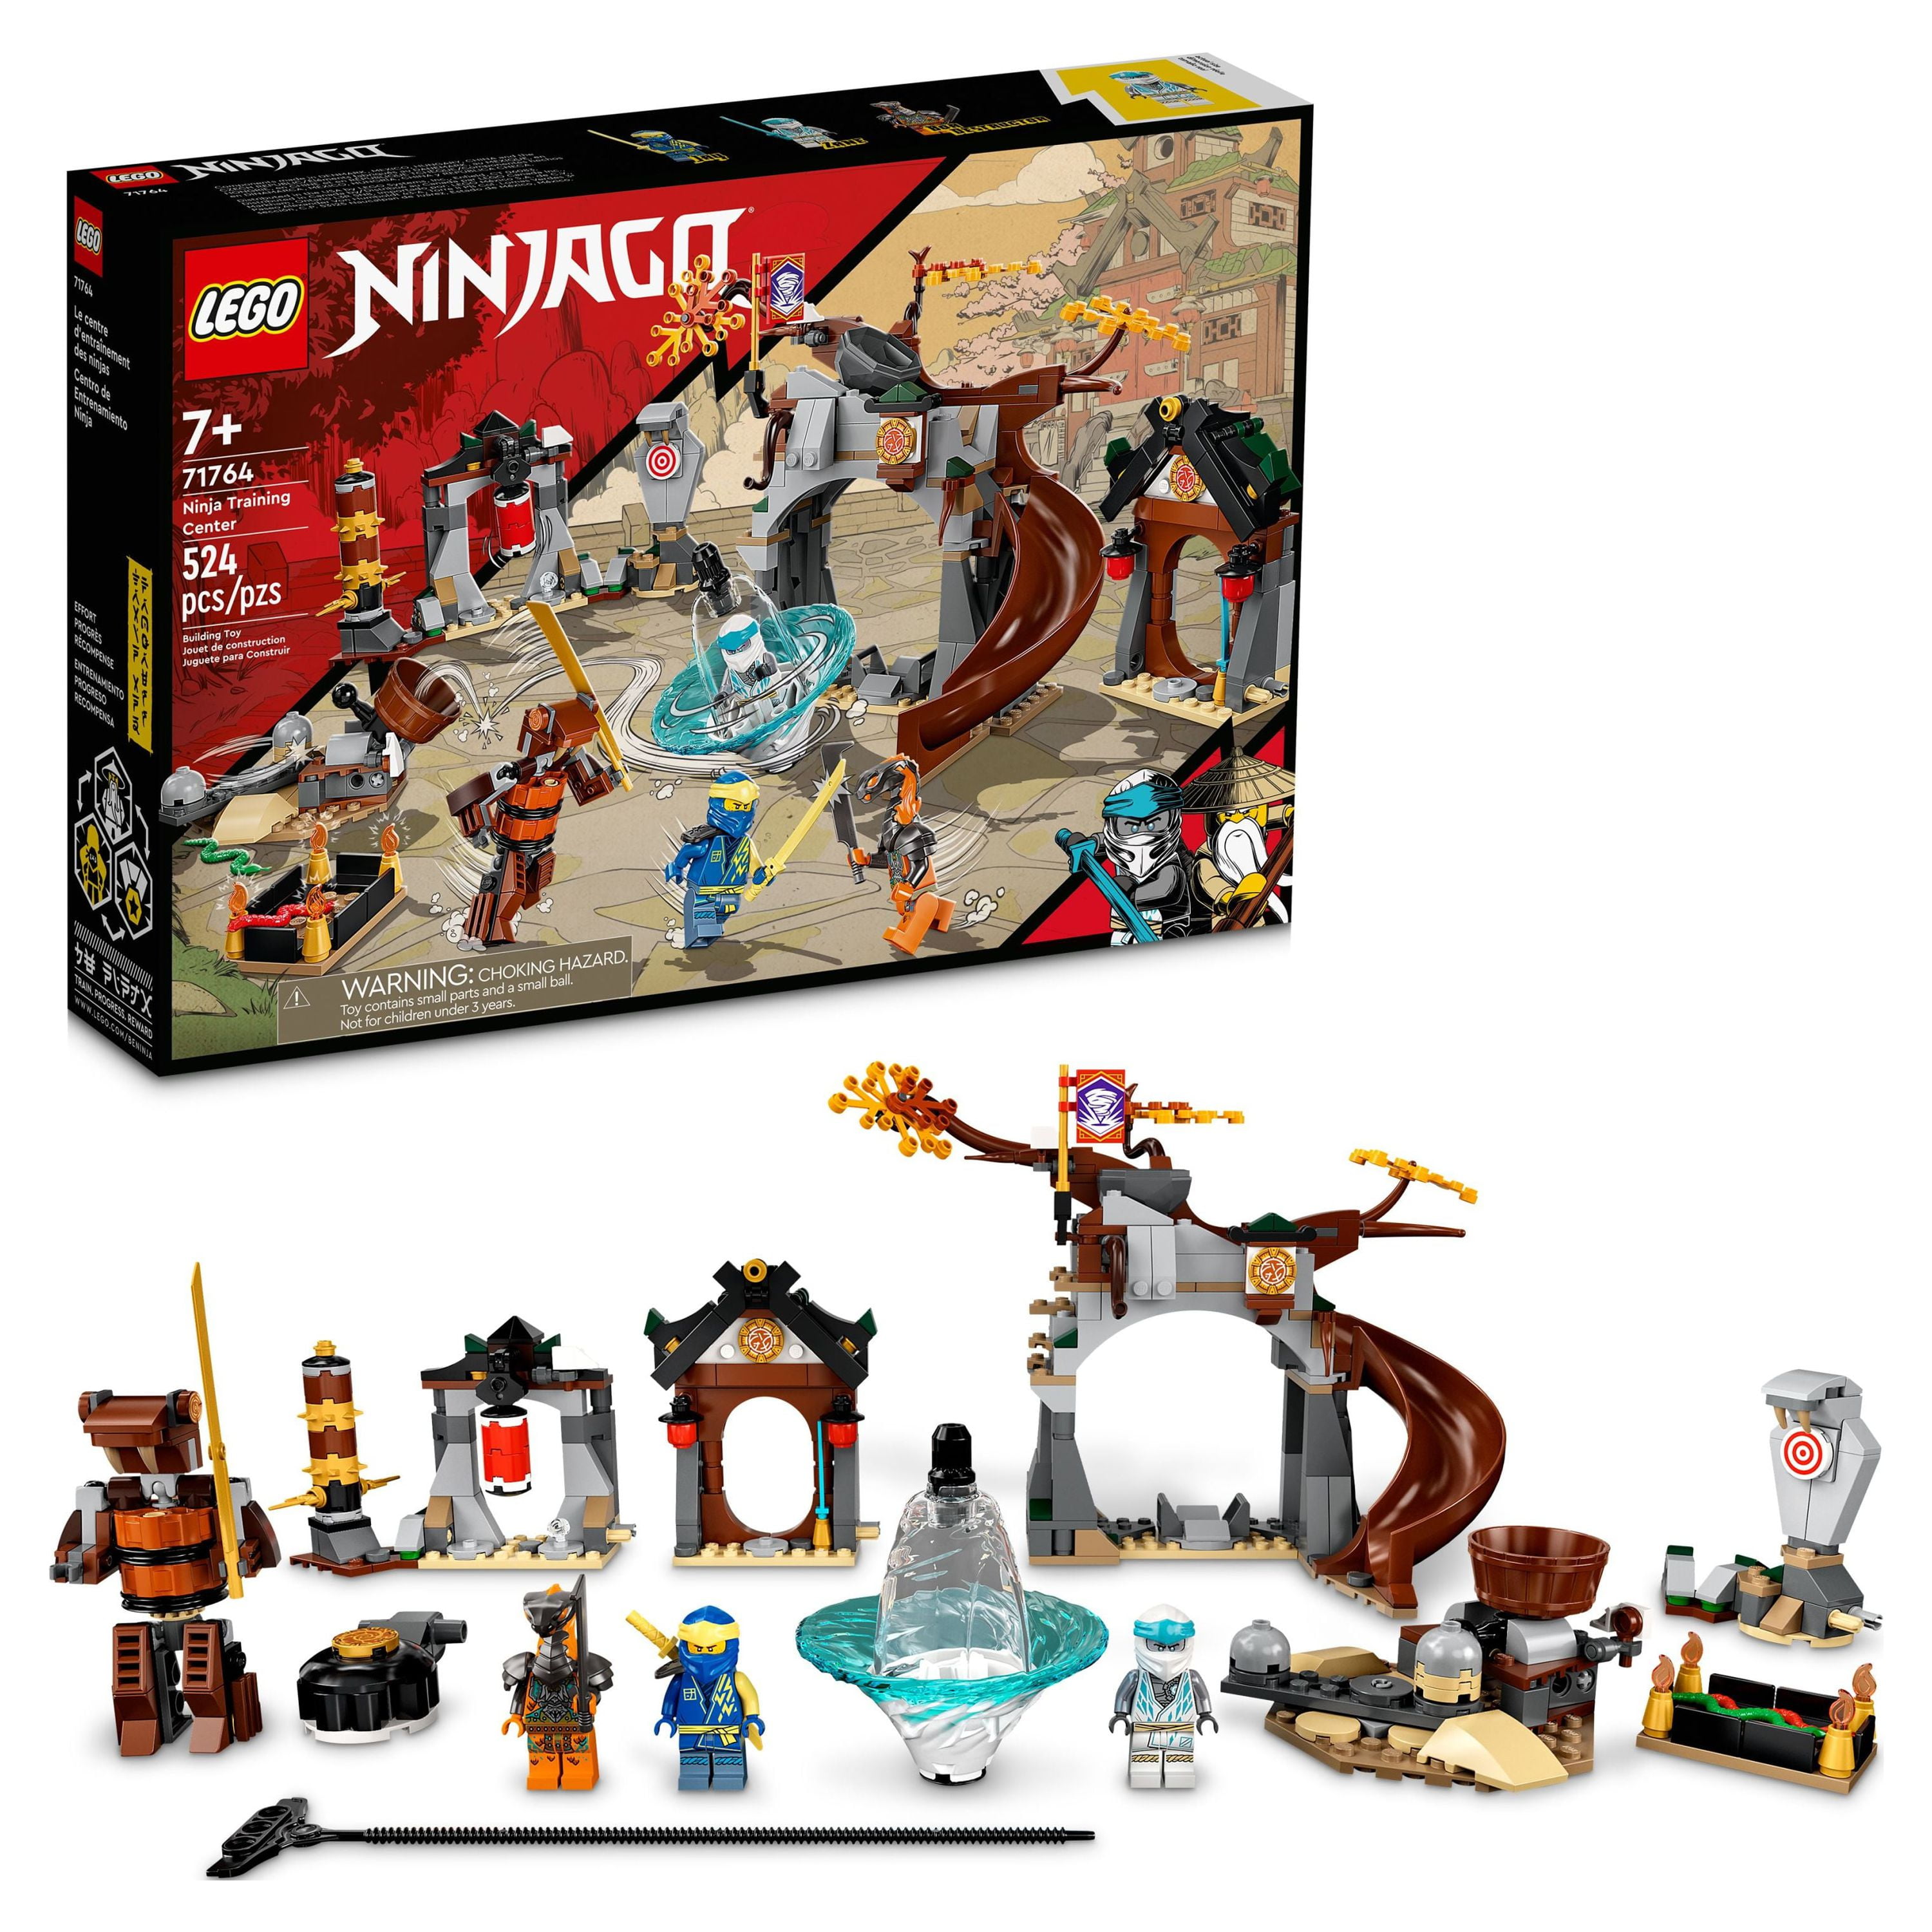 LEGO NINJAGO Ninja Training Center 71764 Building Kit Featuring NINJAGO  Zane and Jay, a Snake Figure and a Spinning Toy; Construction Toys for Kids  Aged 7+ (524 Pieces) 